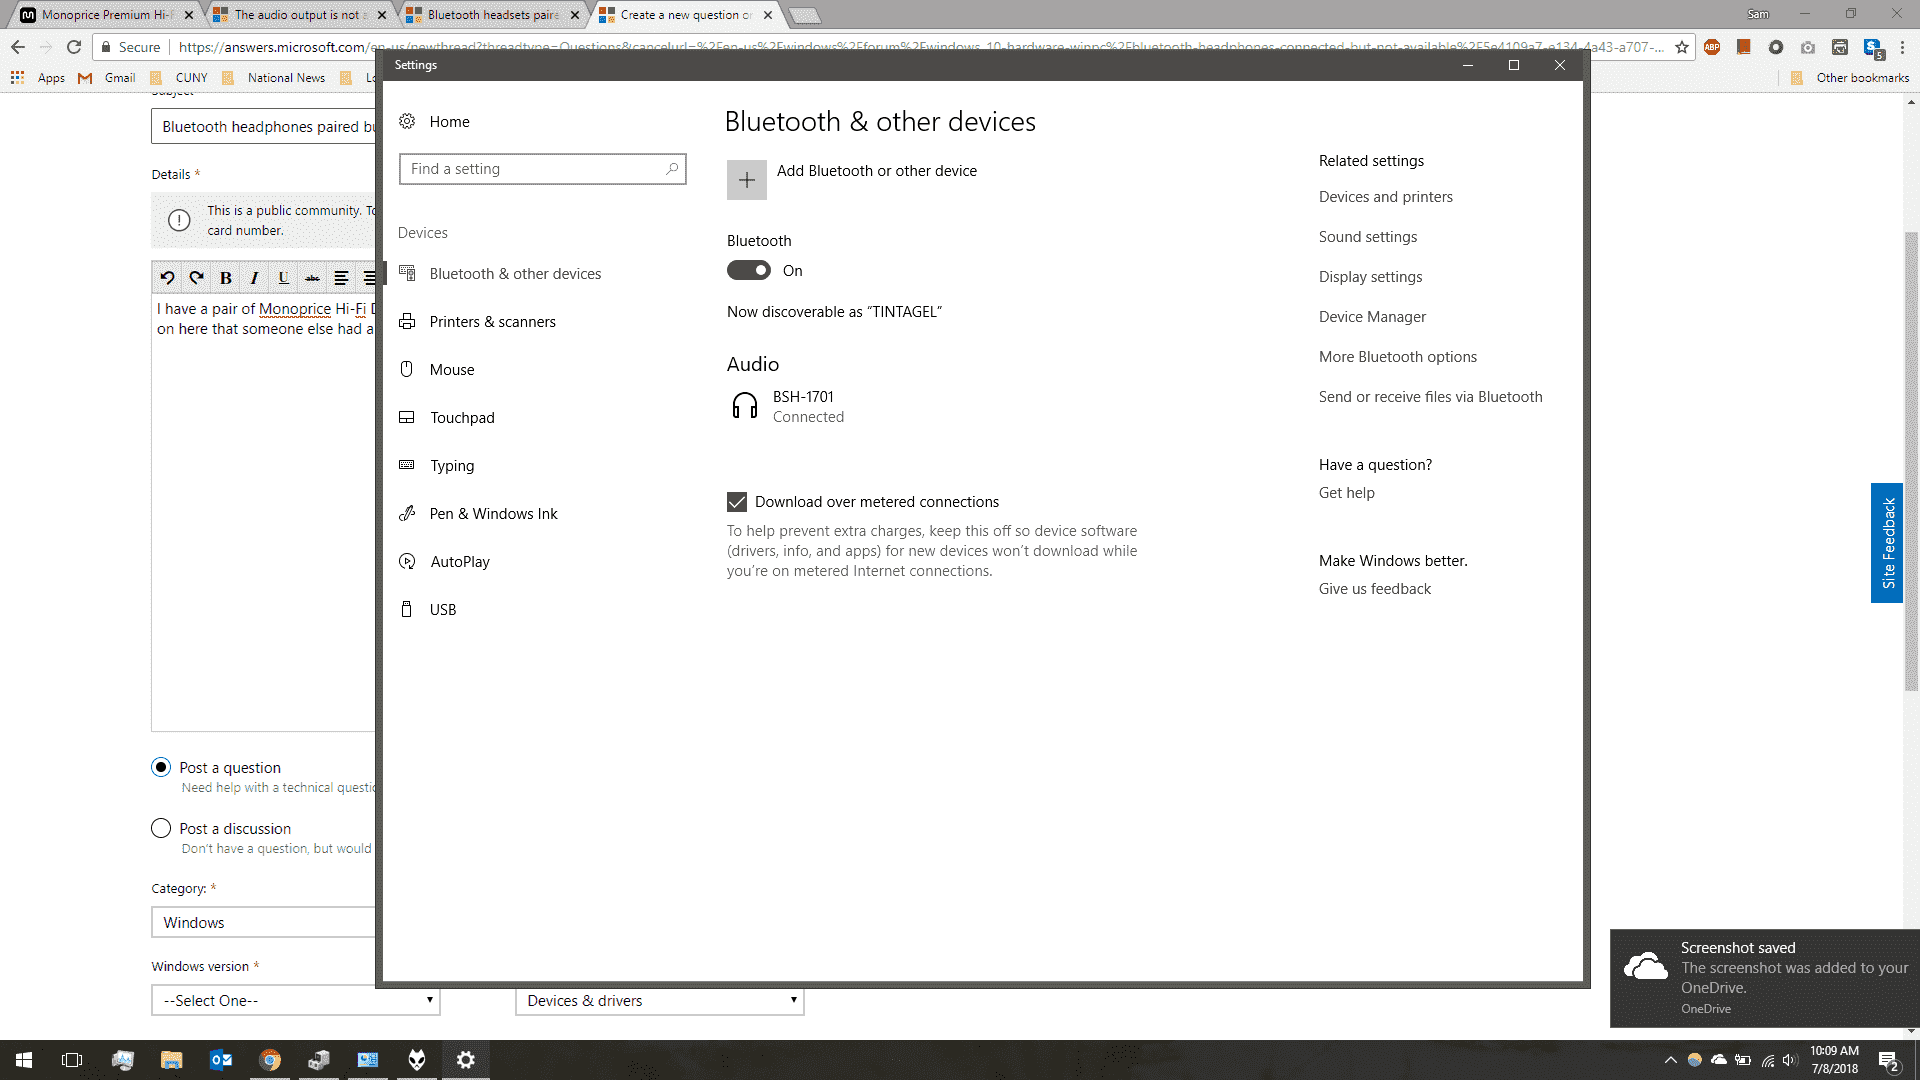 Bluetooth headphones paired but not connected with Windows 10